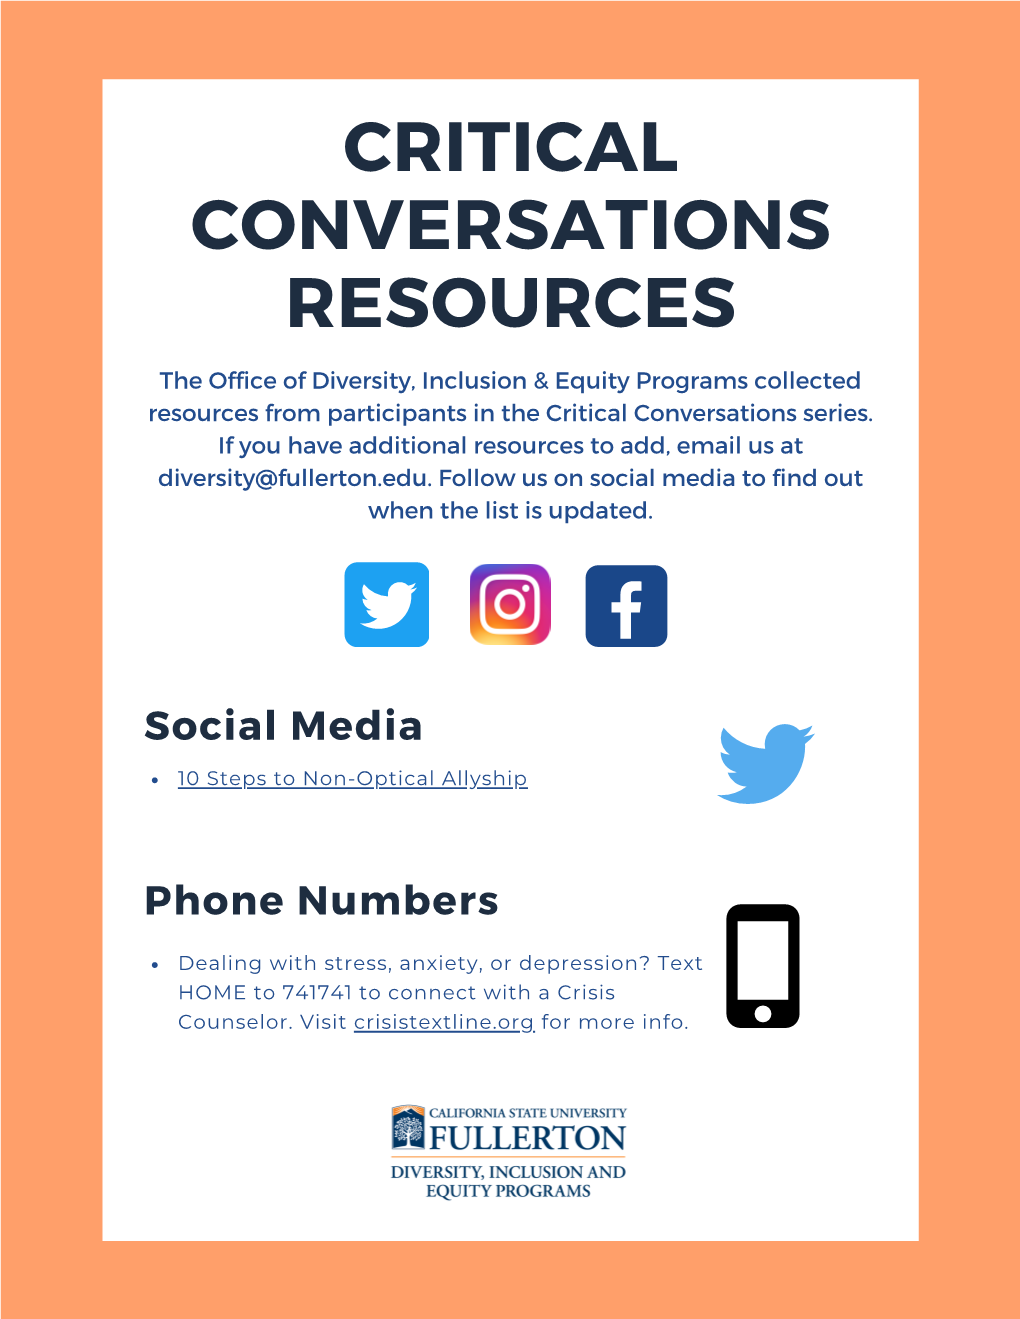 View the Critical Conversations Resources